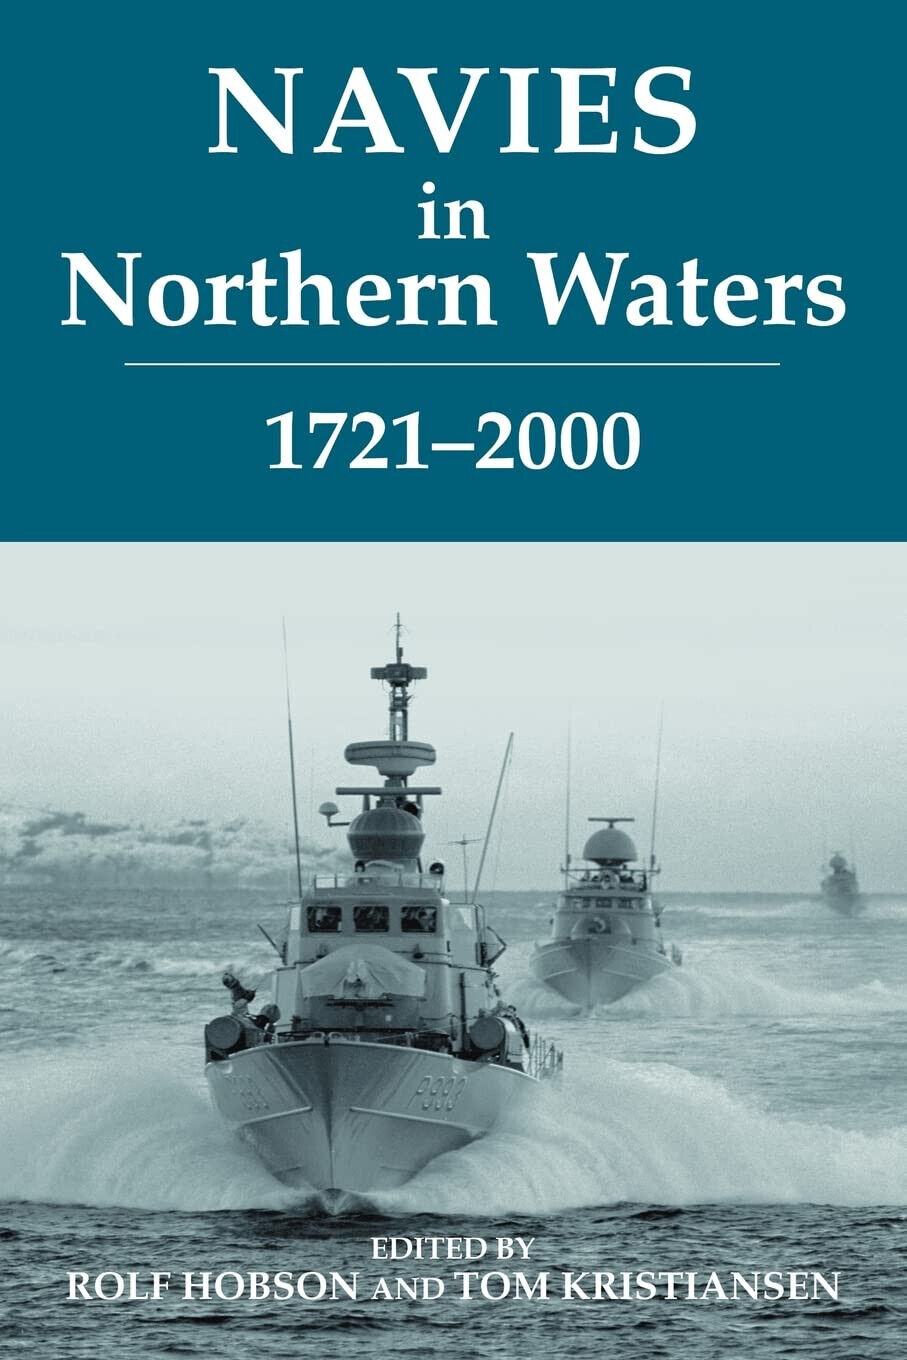 Navies in Northern Waters - Rolf Hobson - Routledge, 2006 libro usato